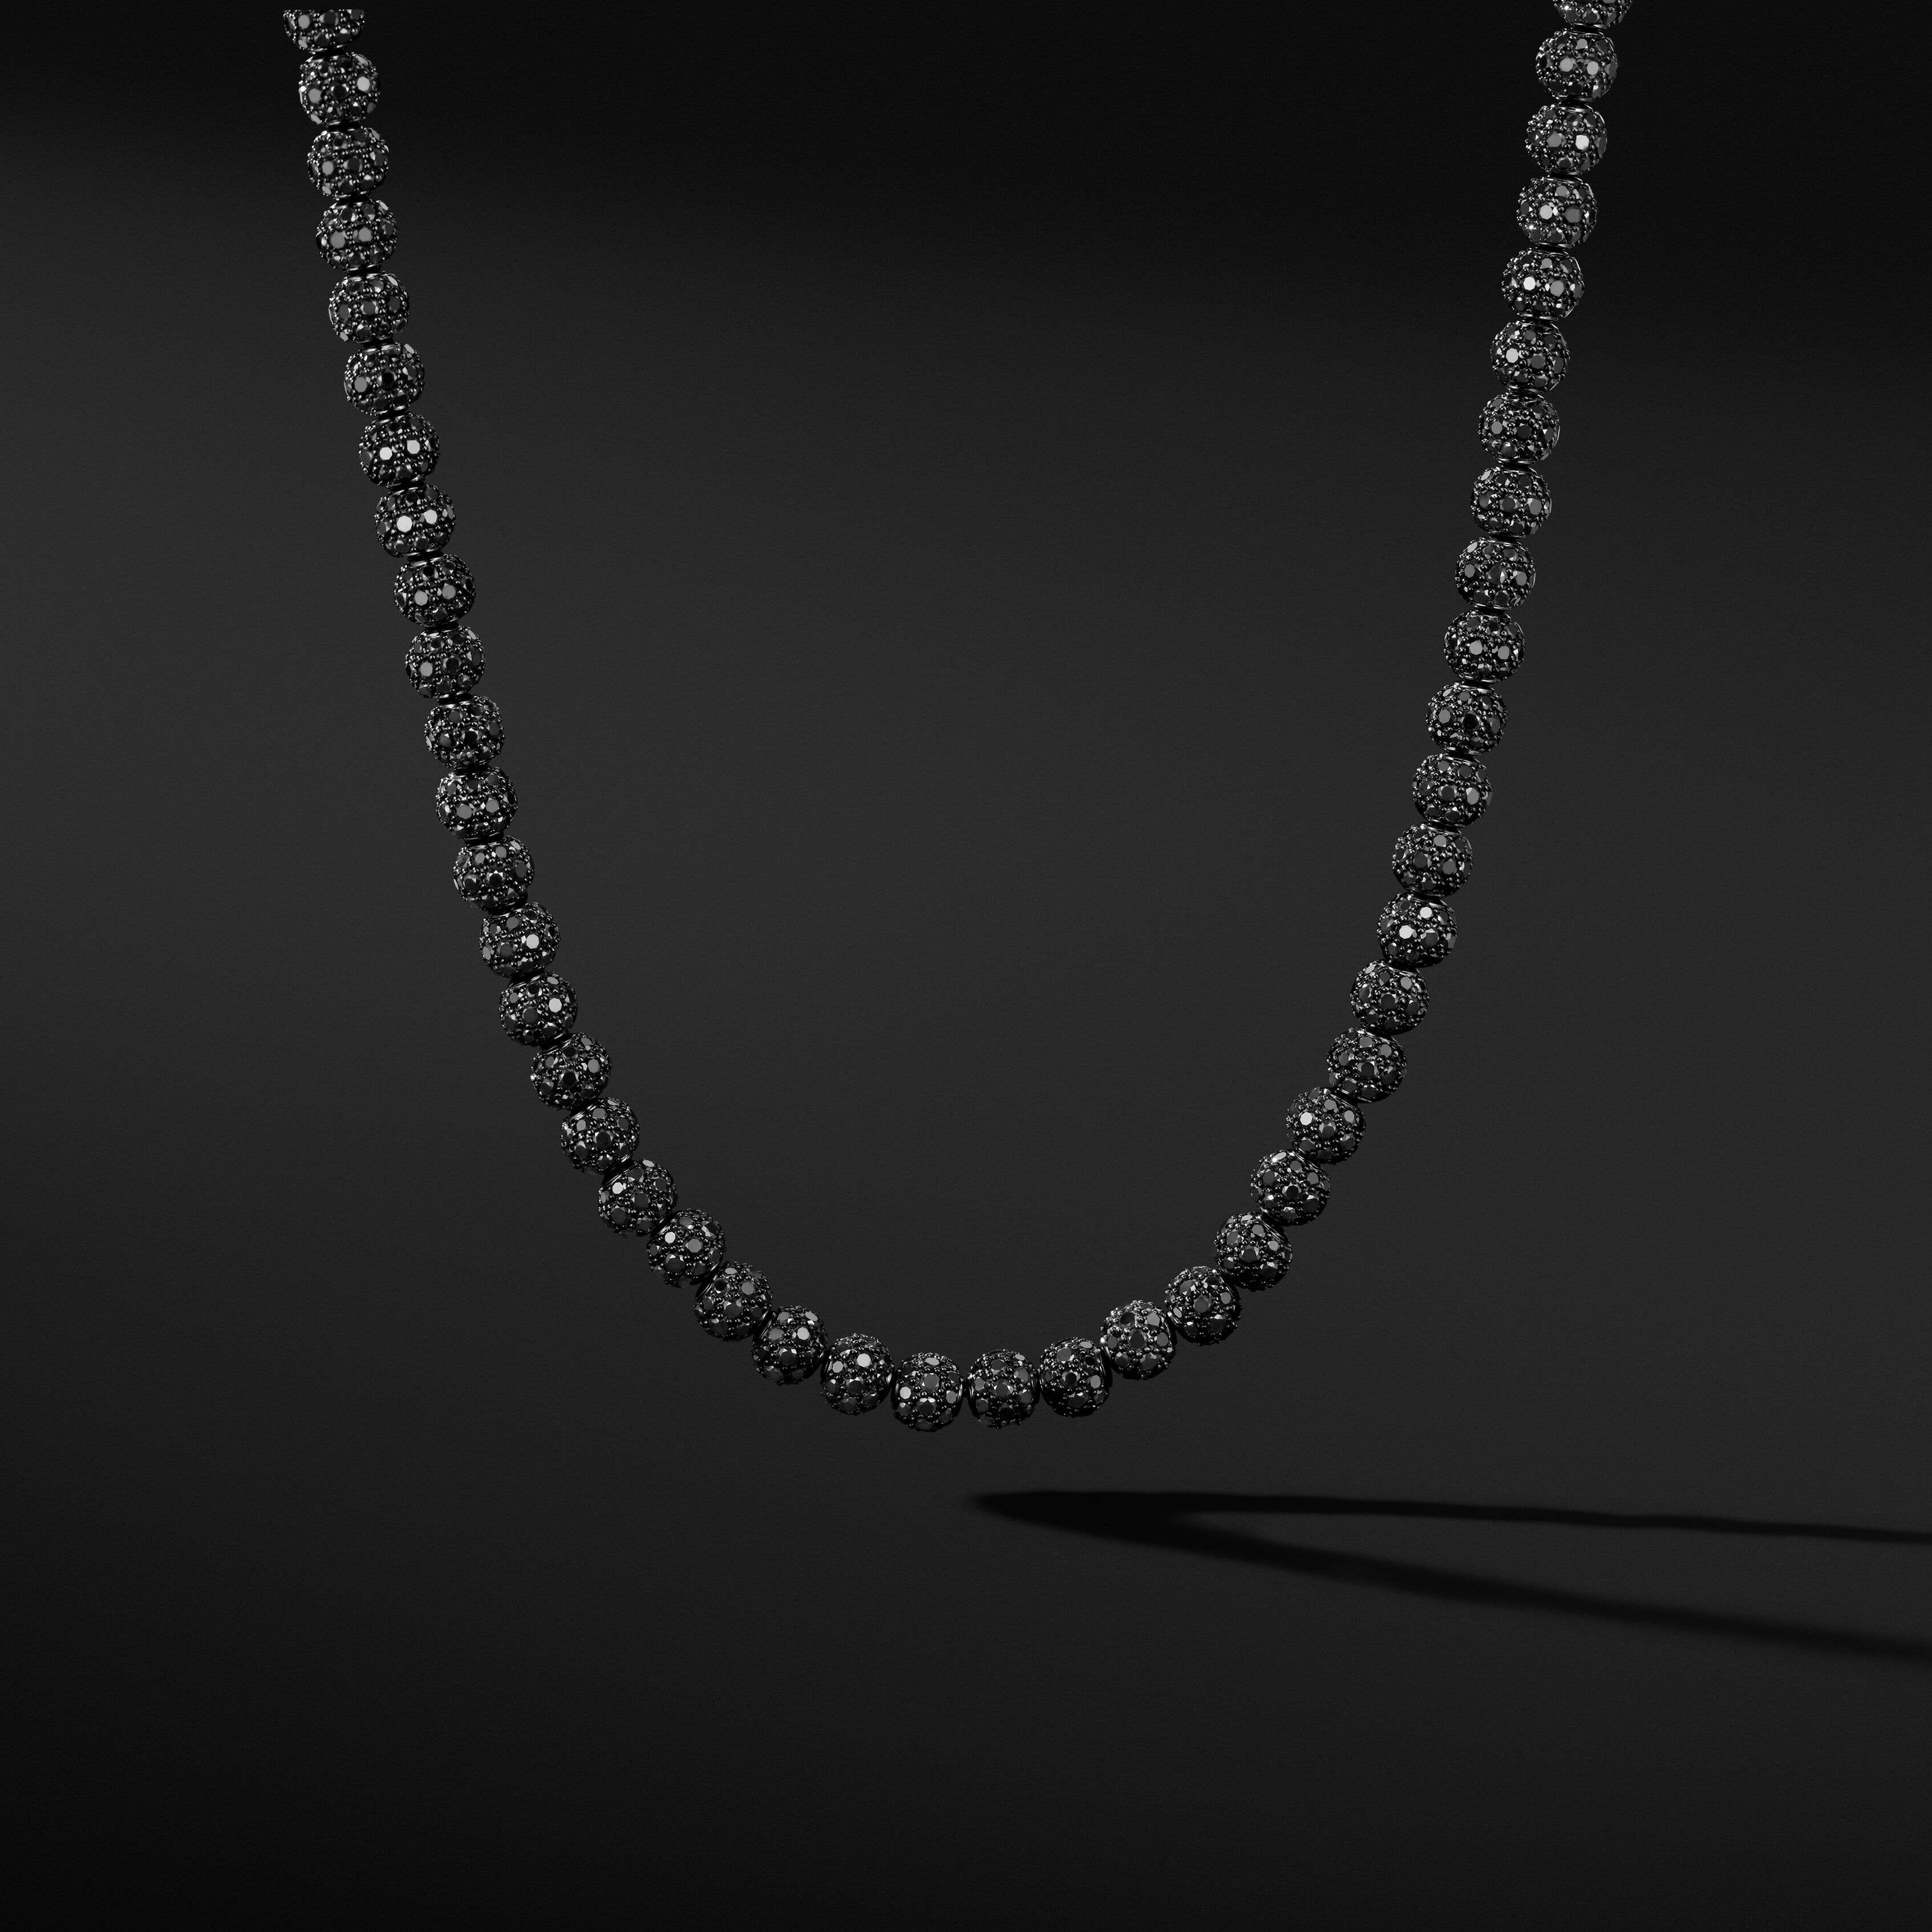 Spiritual Beads Necklace in Sterling Silver with Pavé Black Diamonds